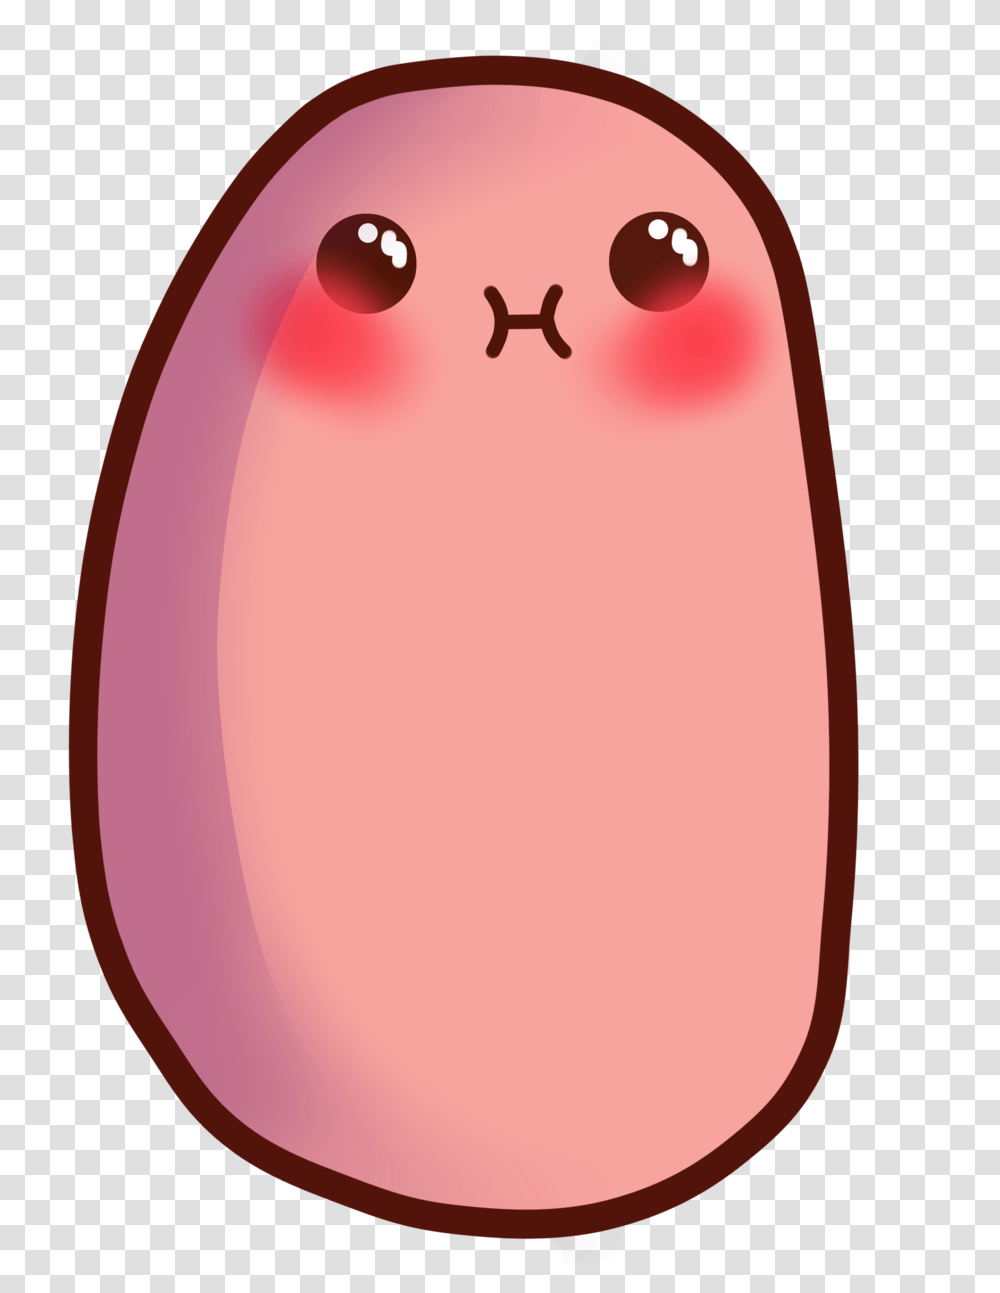 Steam Workshop Potatoes With Cute Face, Food, Egg, Easter Egg, Balloon Transparent Png